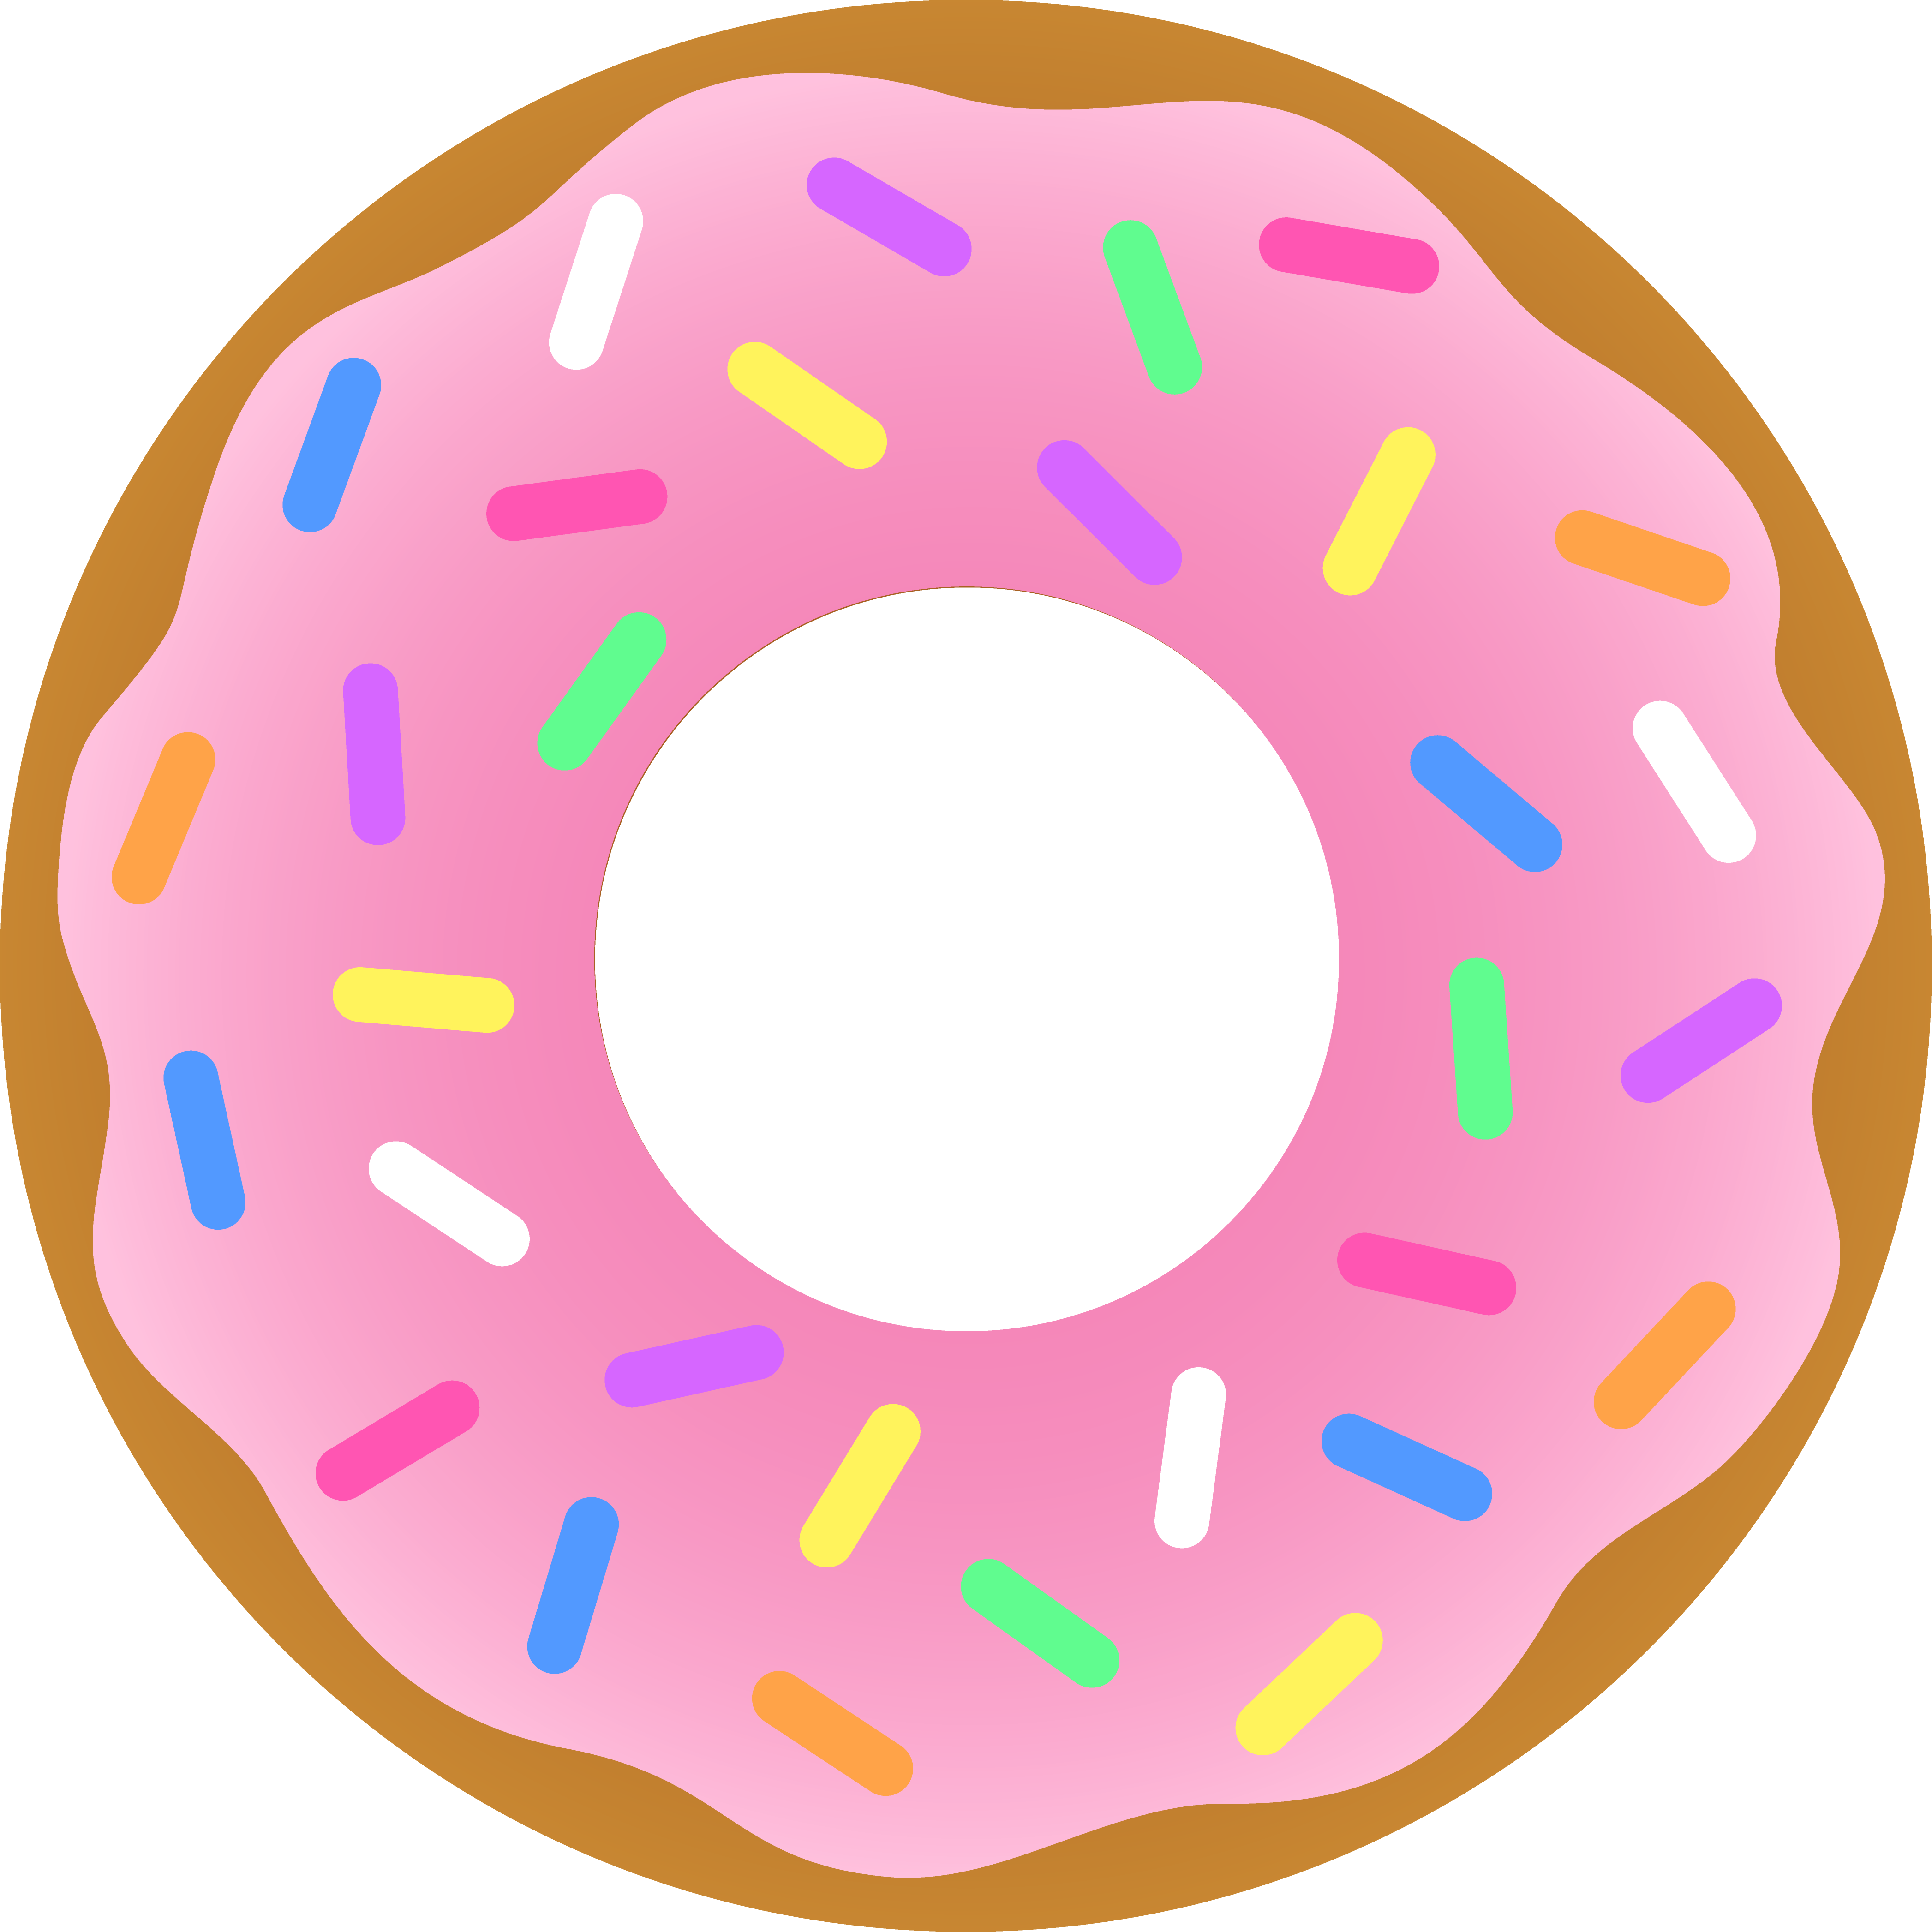 Coffee And Donuts Clipart